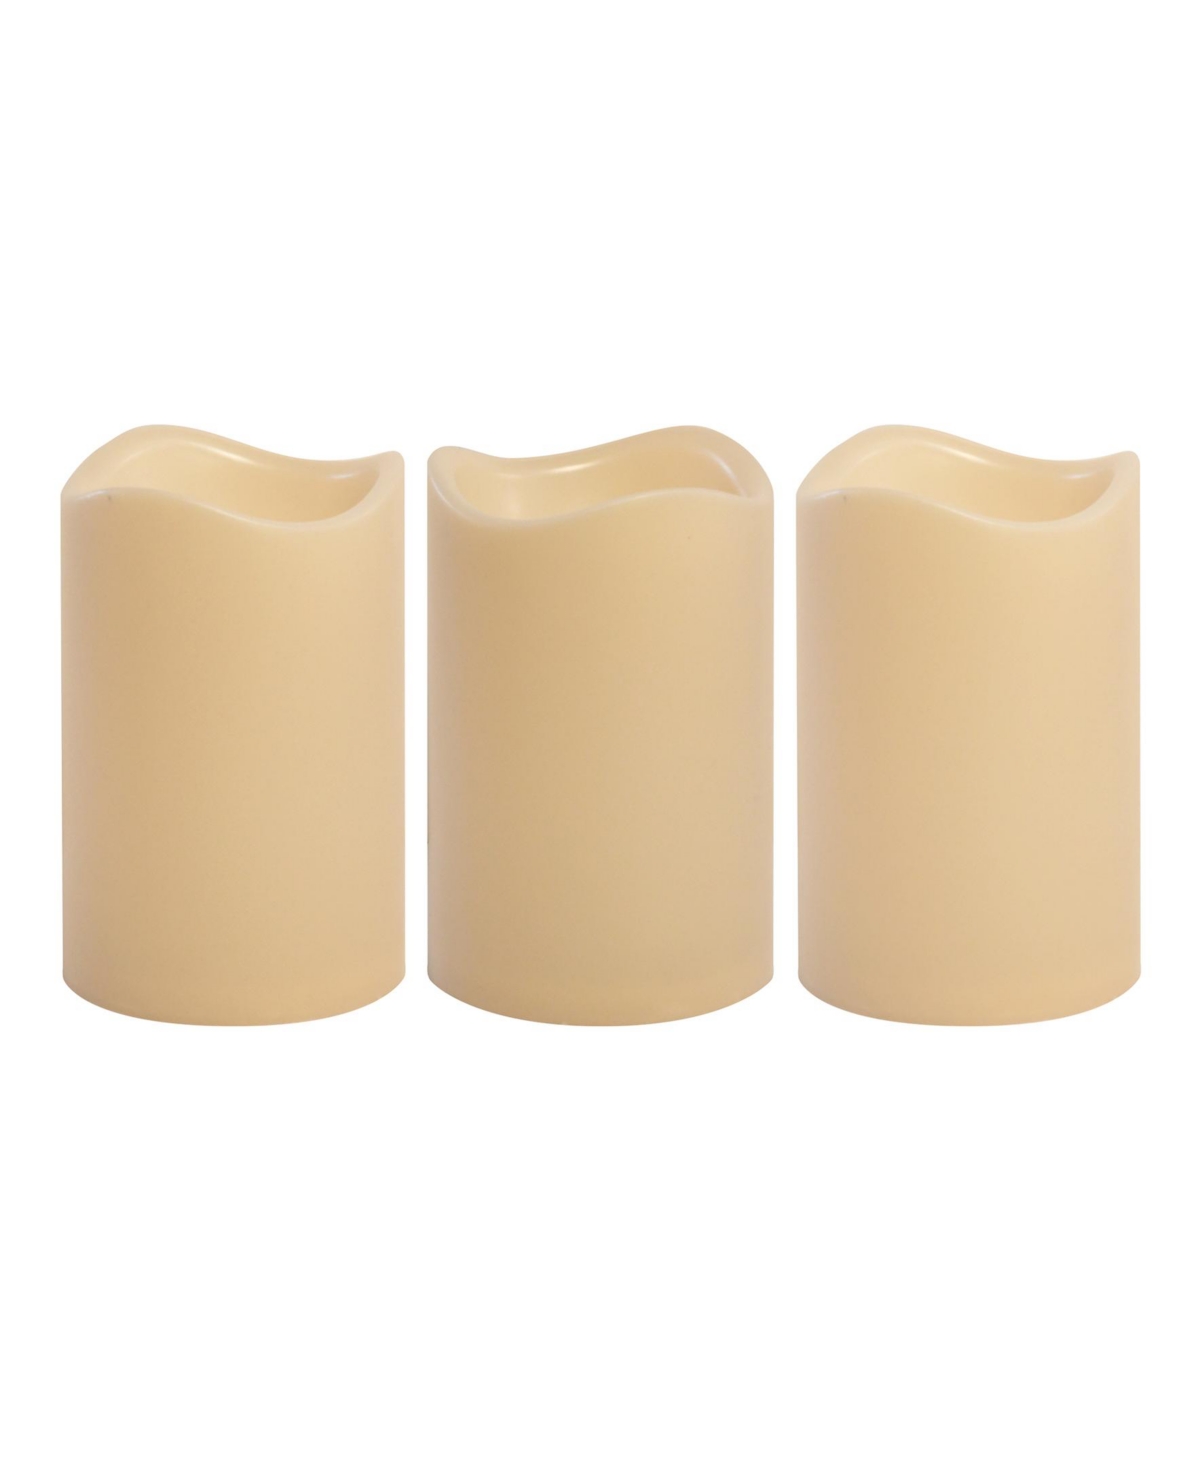 Battery Operated Led Pillar Candles, Set of 3 - Cream